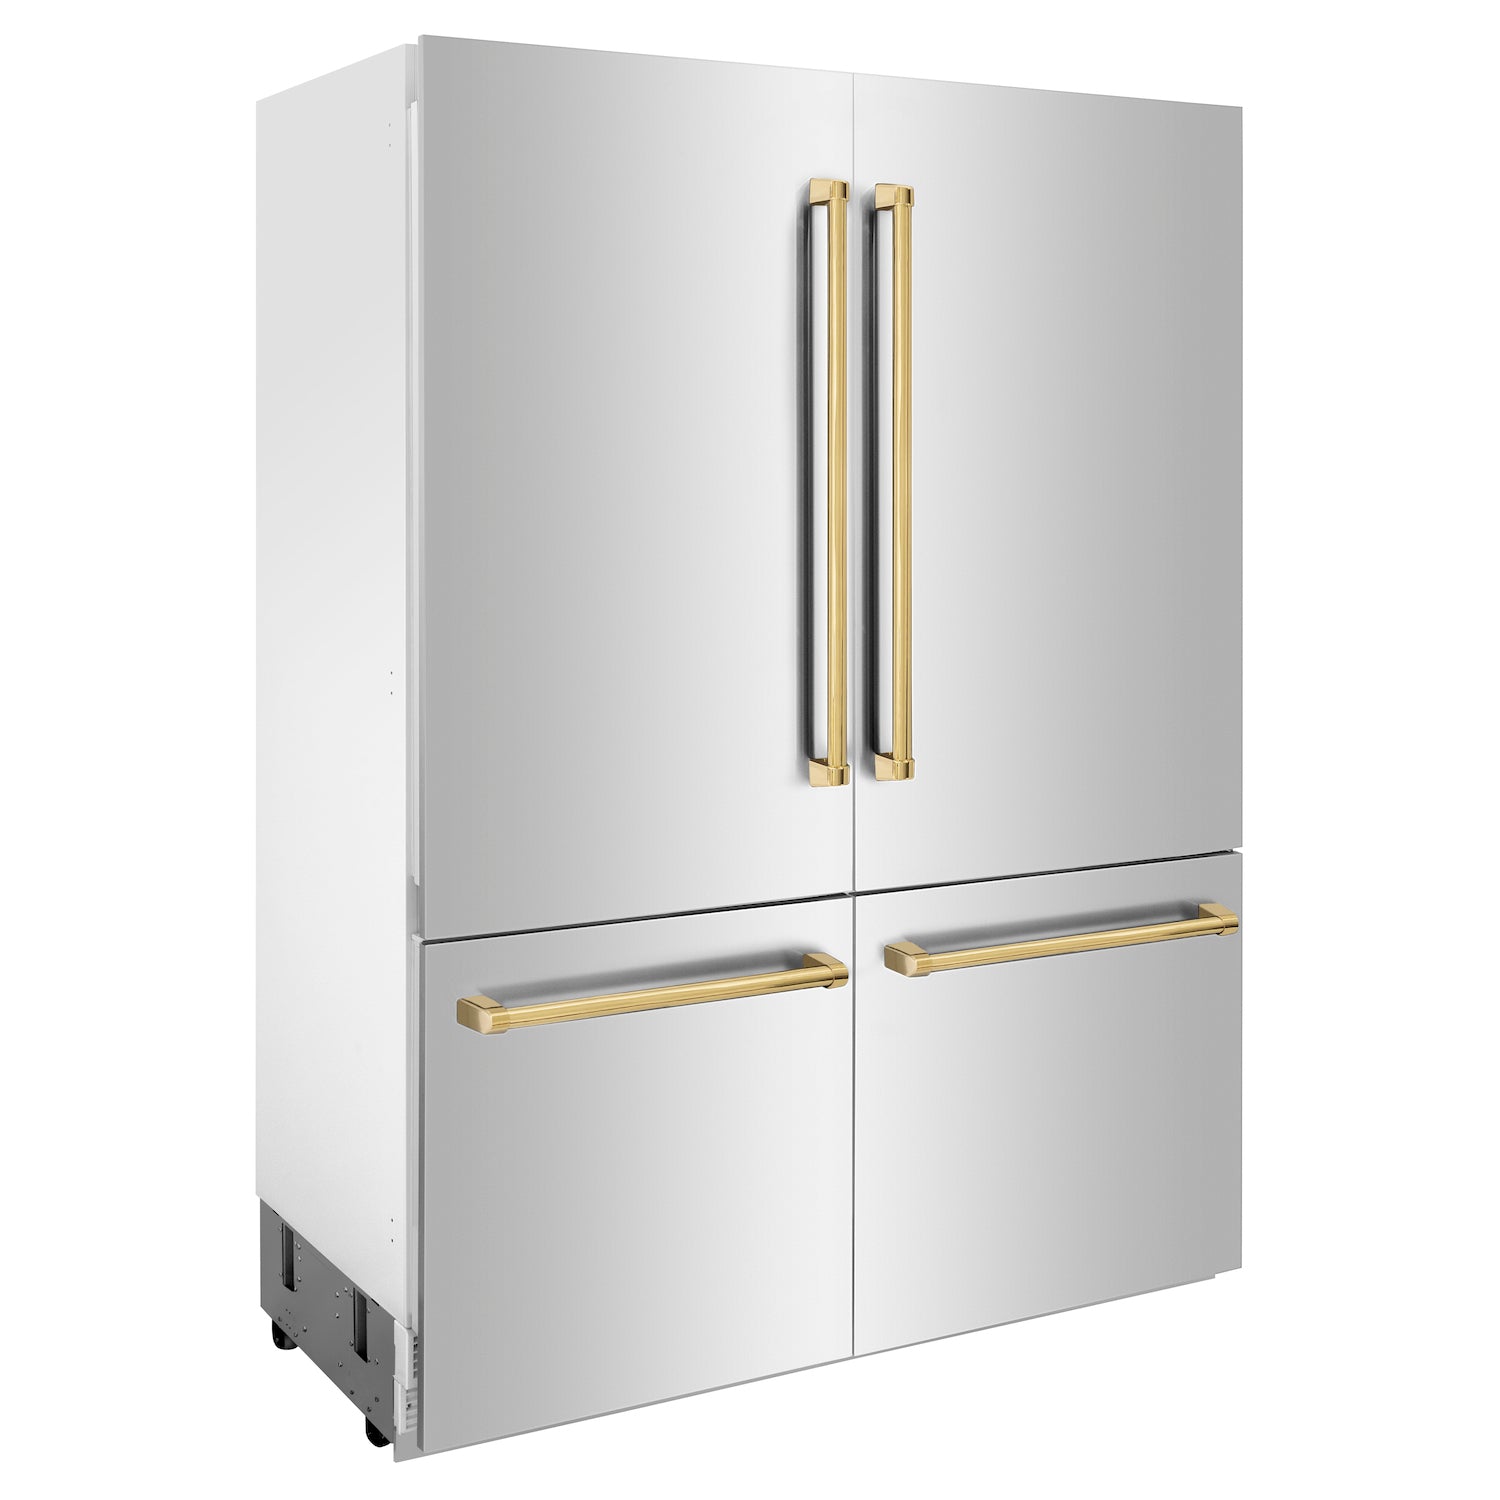 ZLINE Autograph Edition 60 in. Built-in Refrigerator in Stainless Steel with Polished Gold Accents (RBIVZ-304-60-G) side, doors closed.